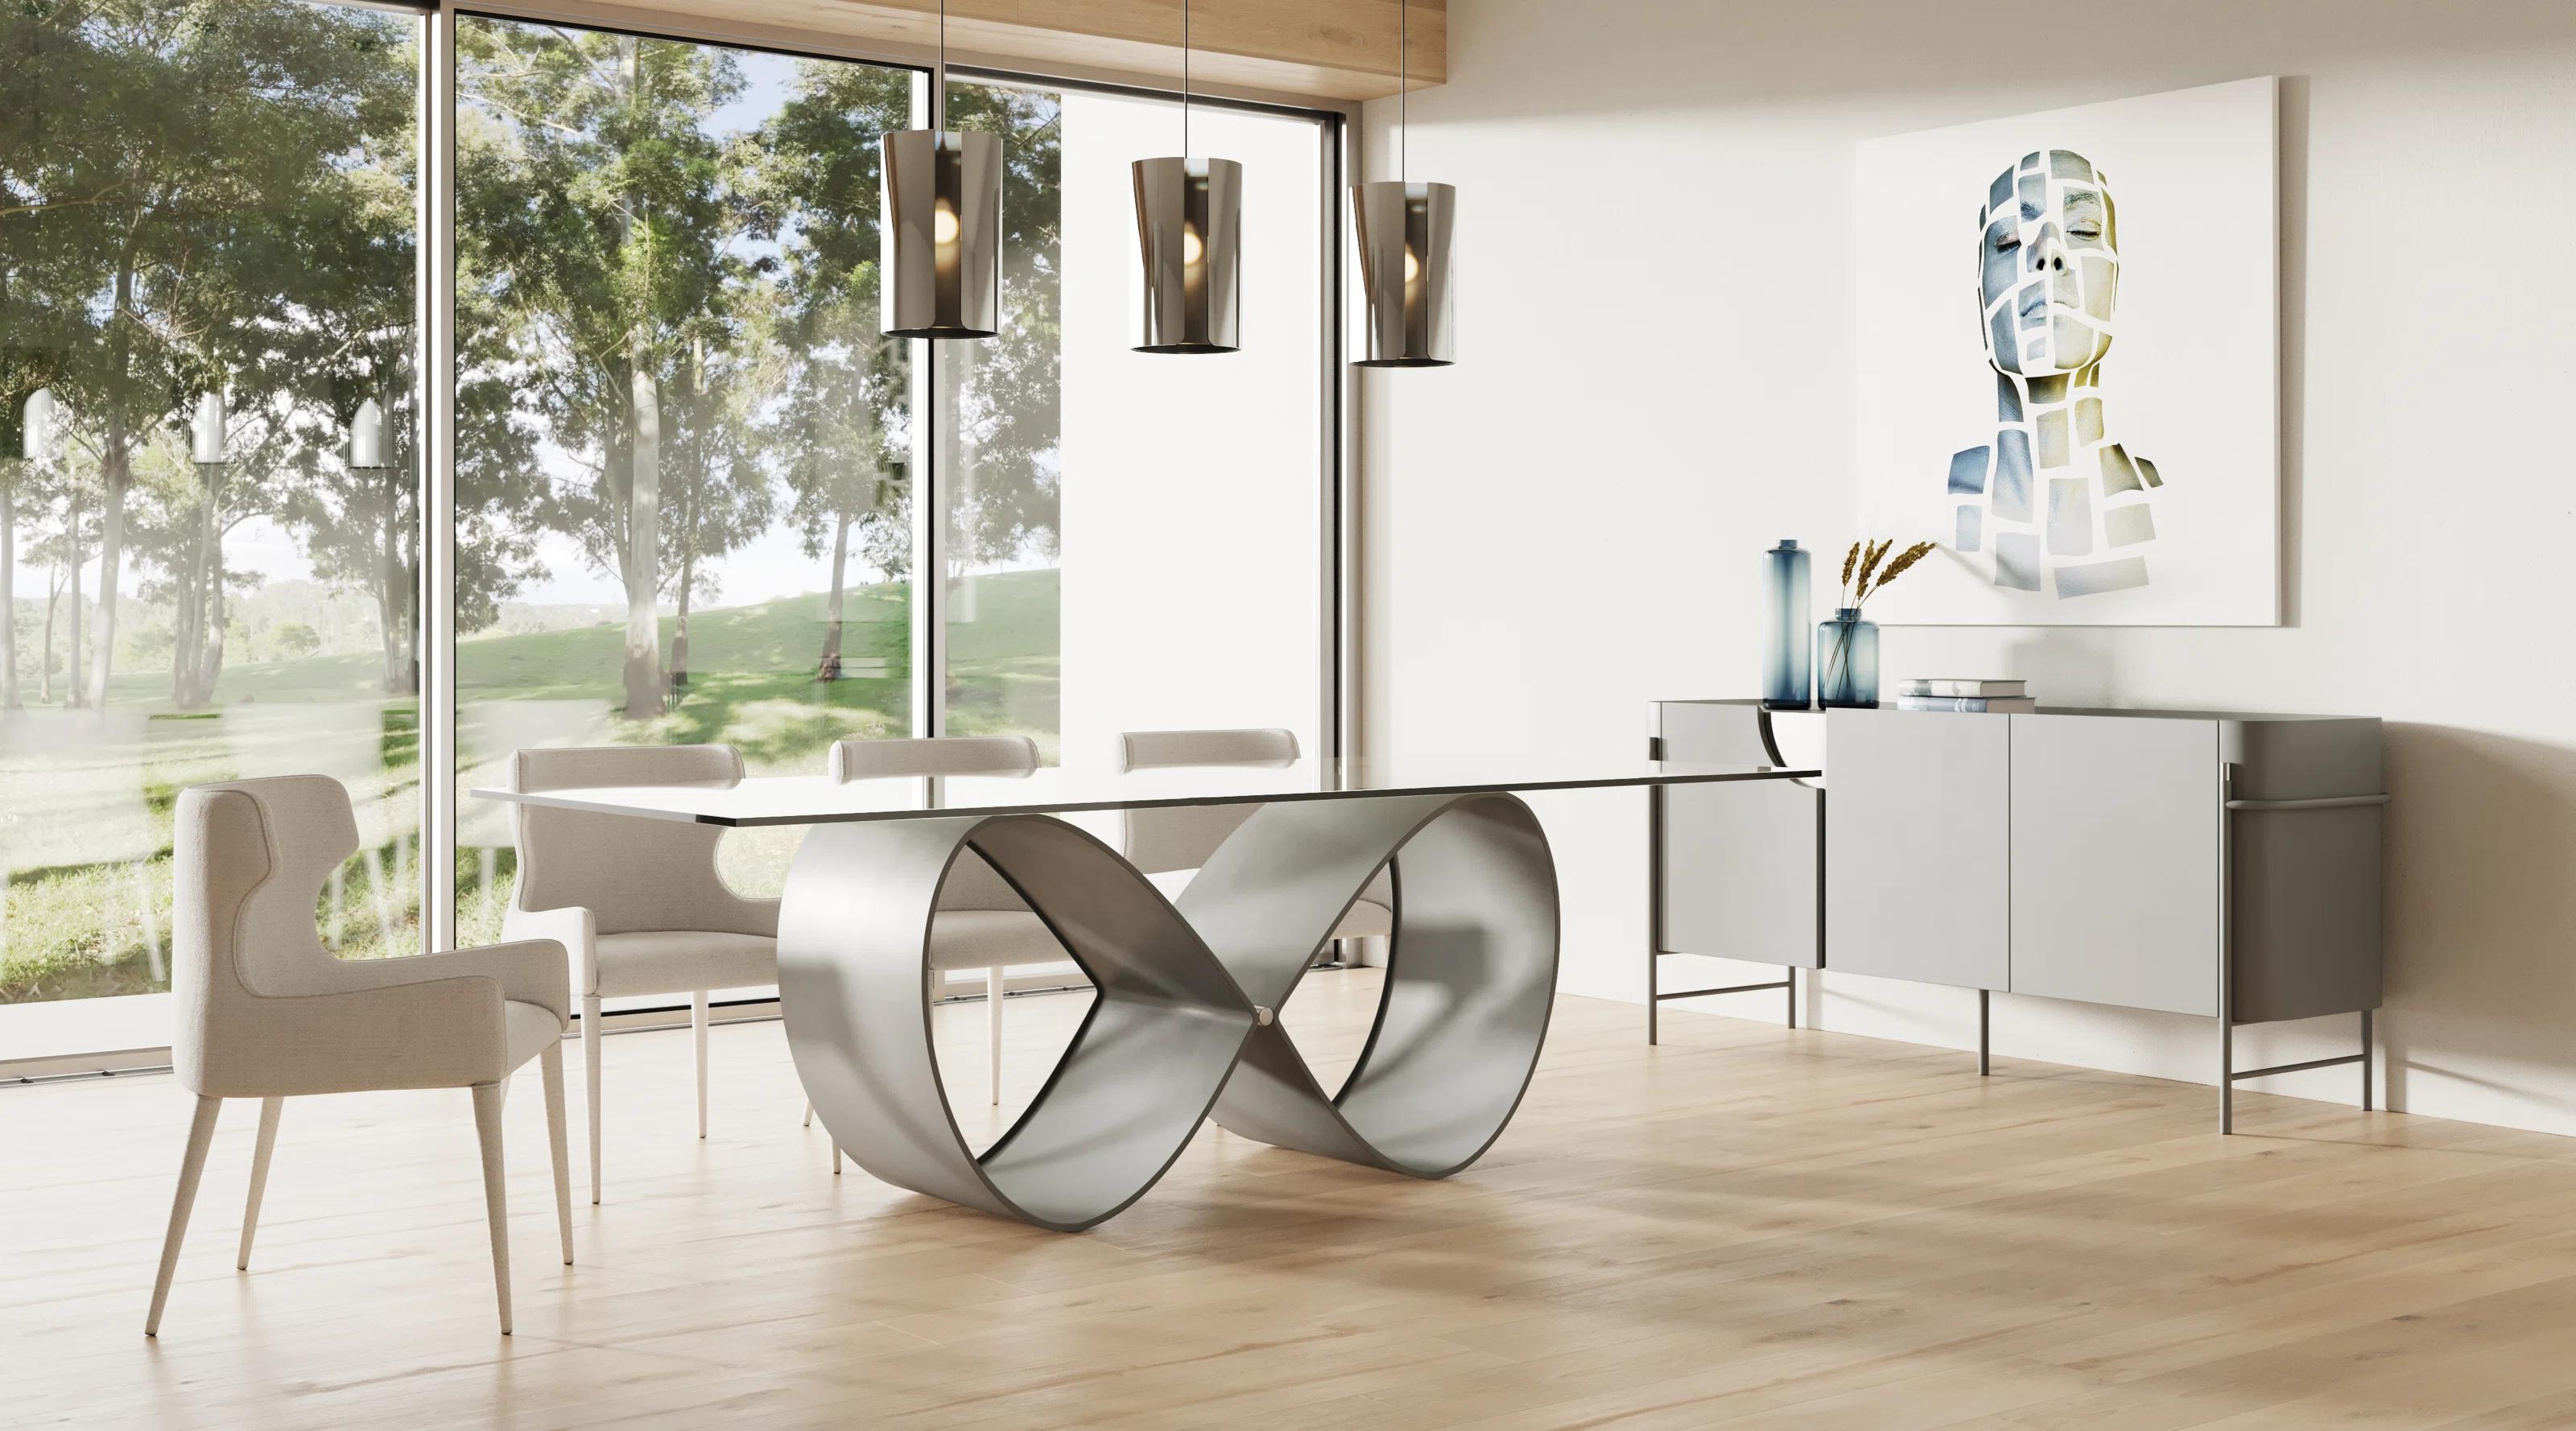 Contemporary, Modern Dining Room Set Hadley VGGM-DT-CASTA-DT-8pcs in Silver Fabric